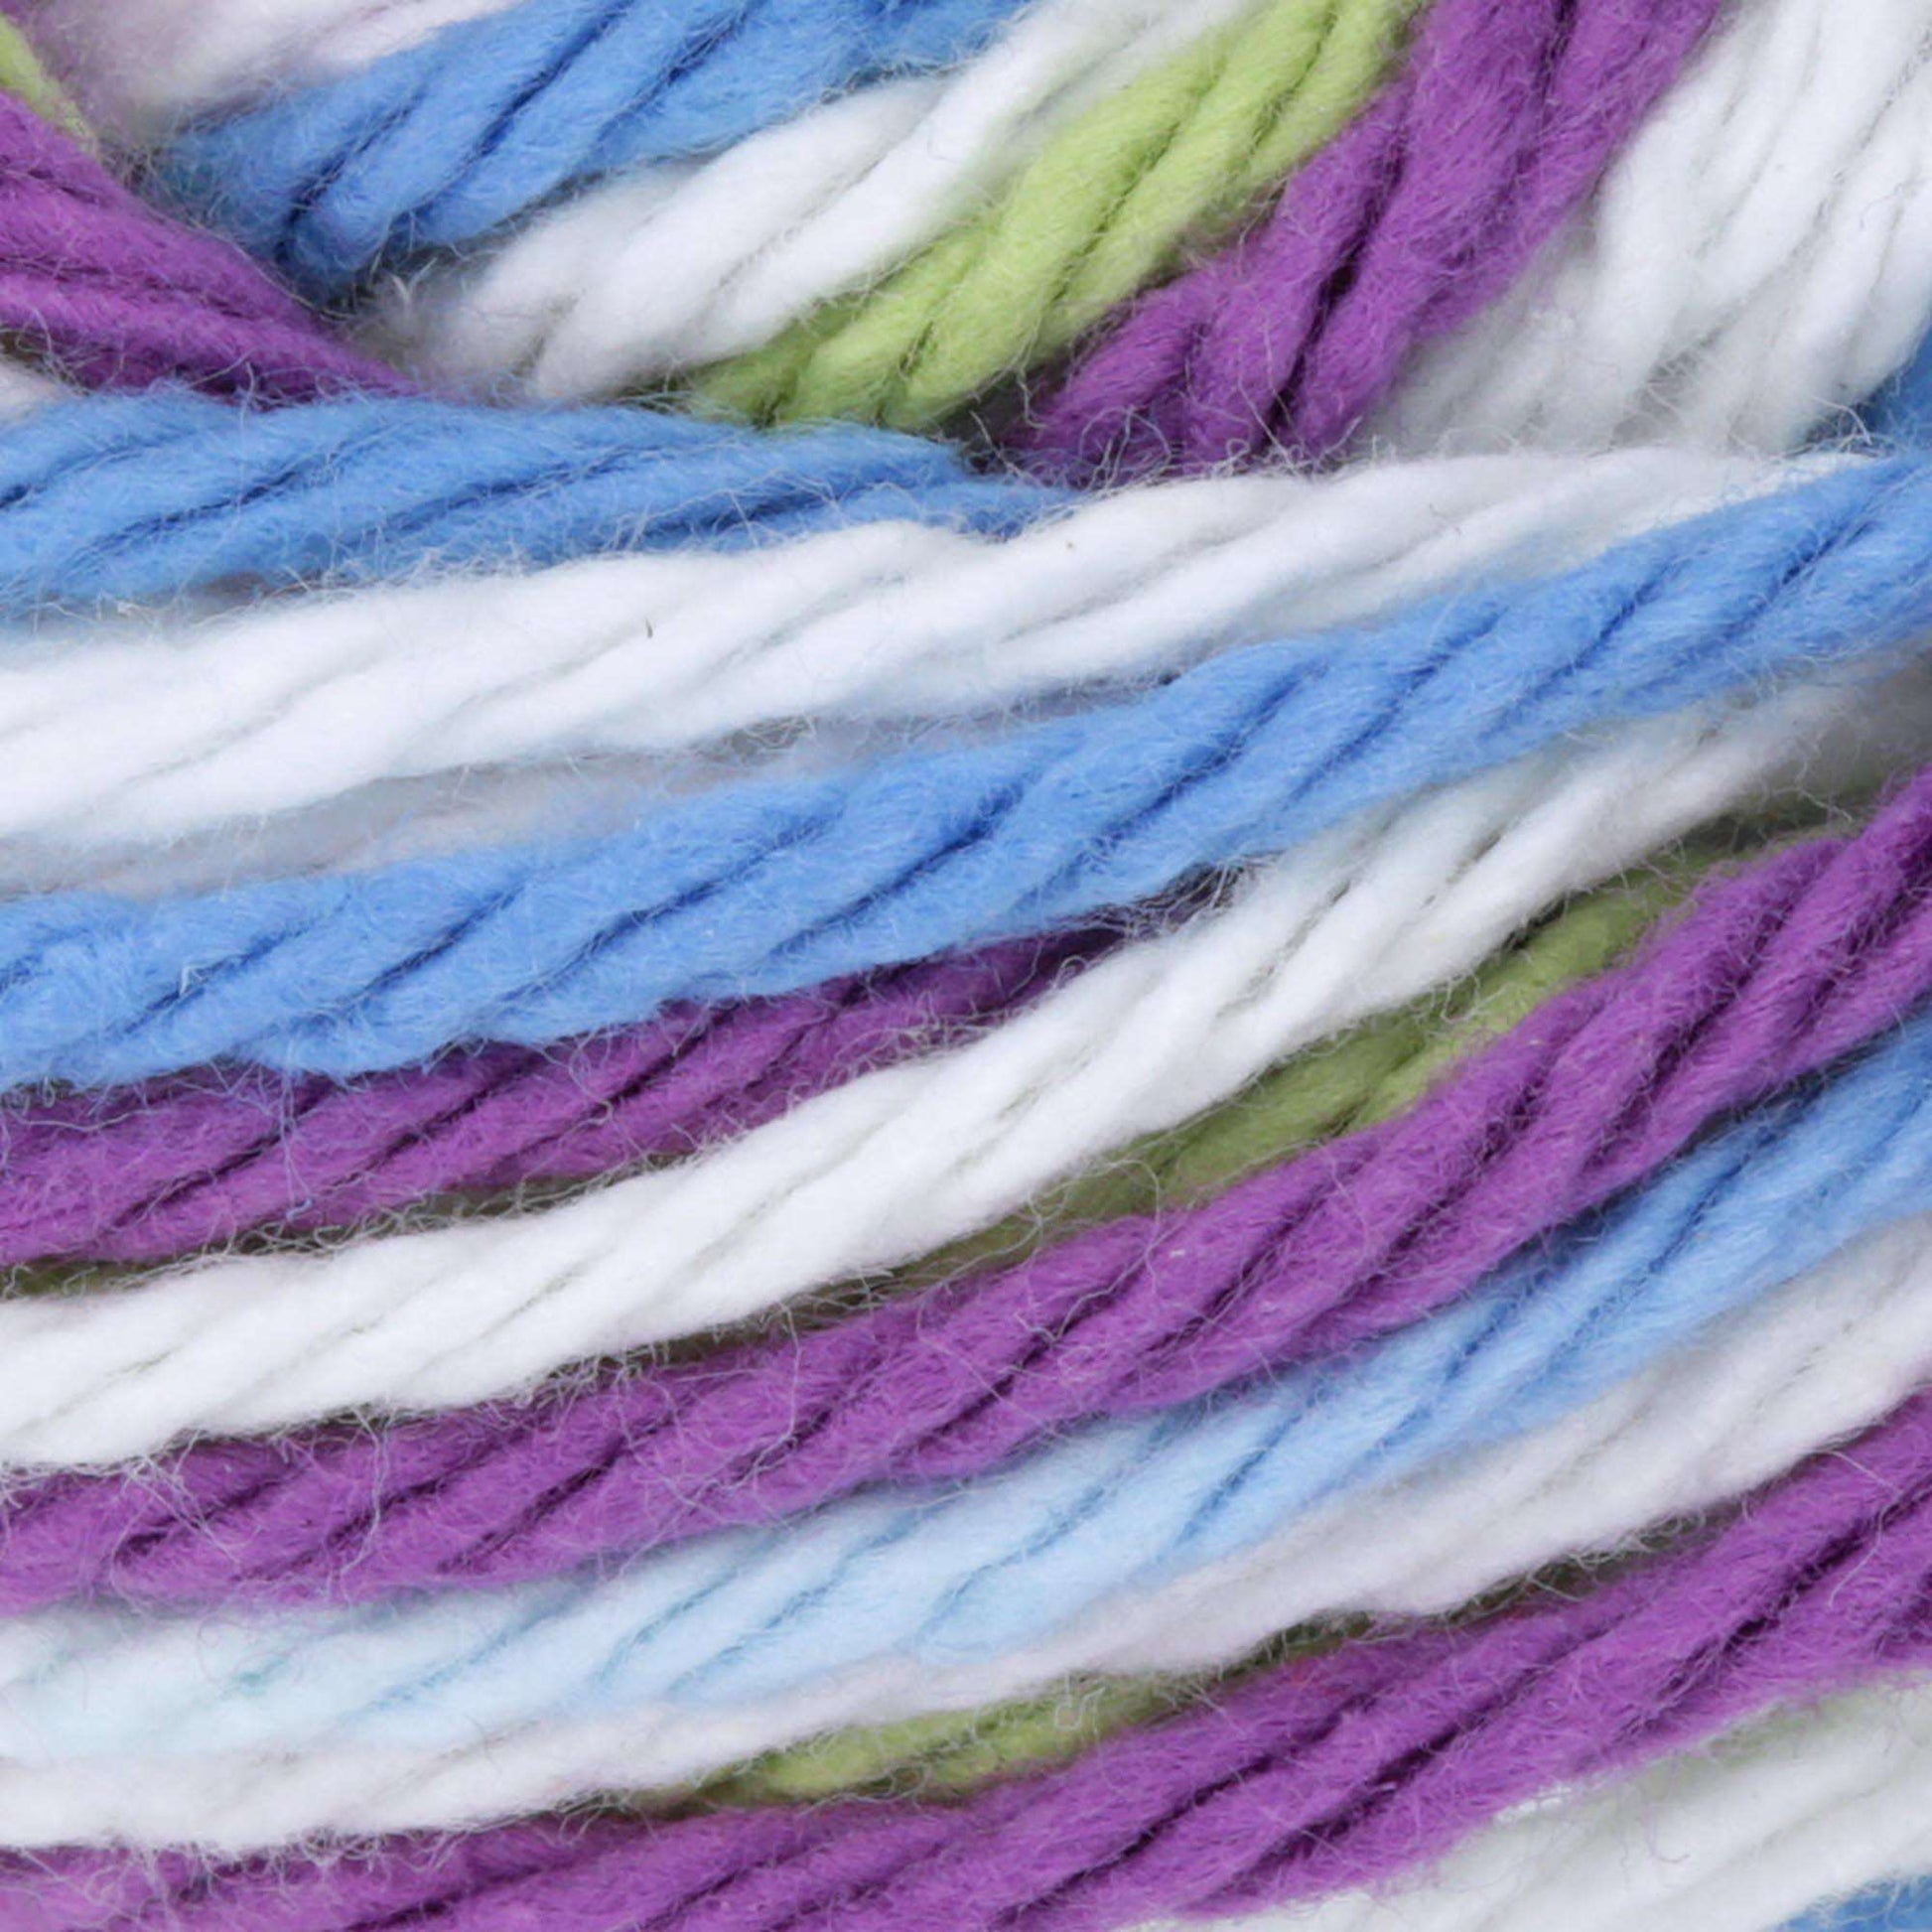 Lily Sugar'n Cream Ombres Yarn Fruit Punch Ombre